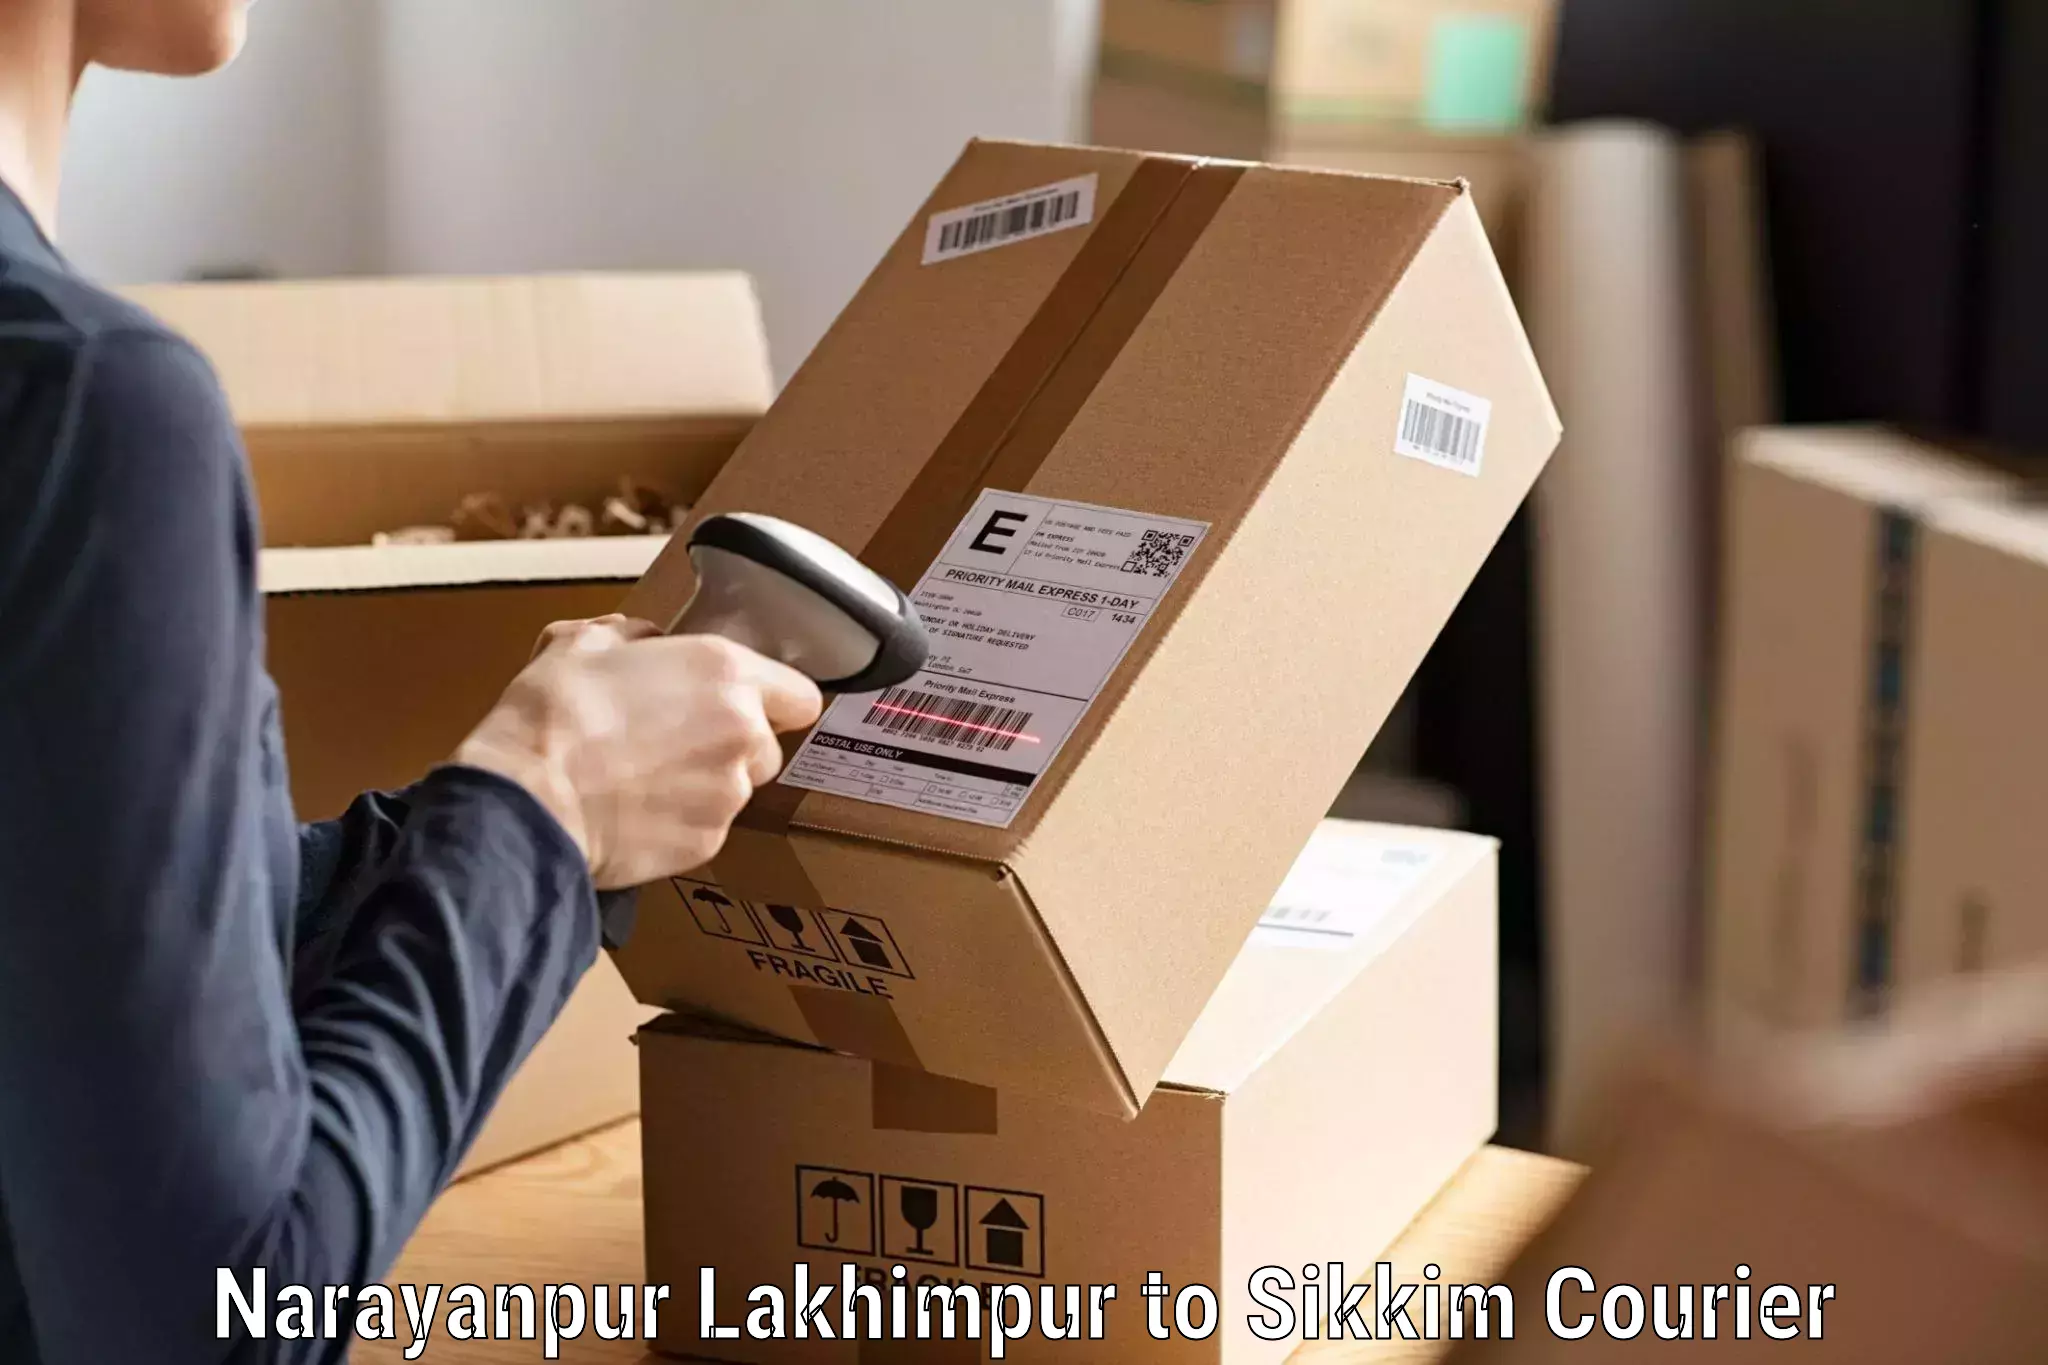 Parcel handling and care Narayanpur Lakhimpur to Sikkim